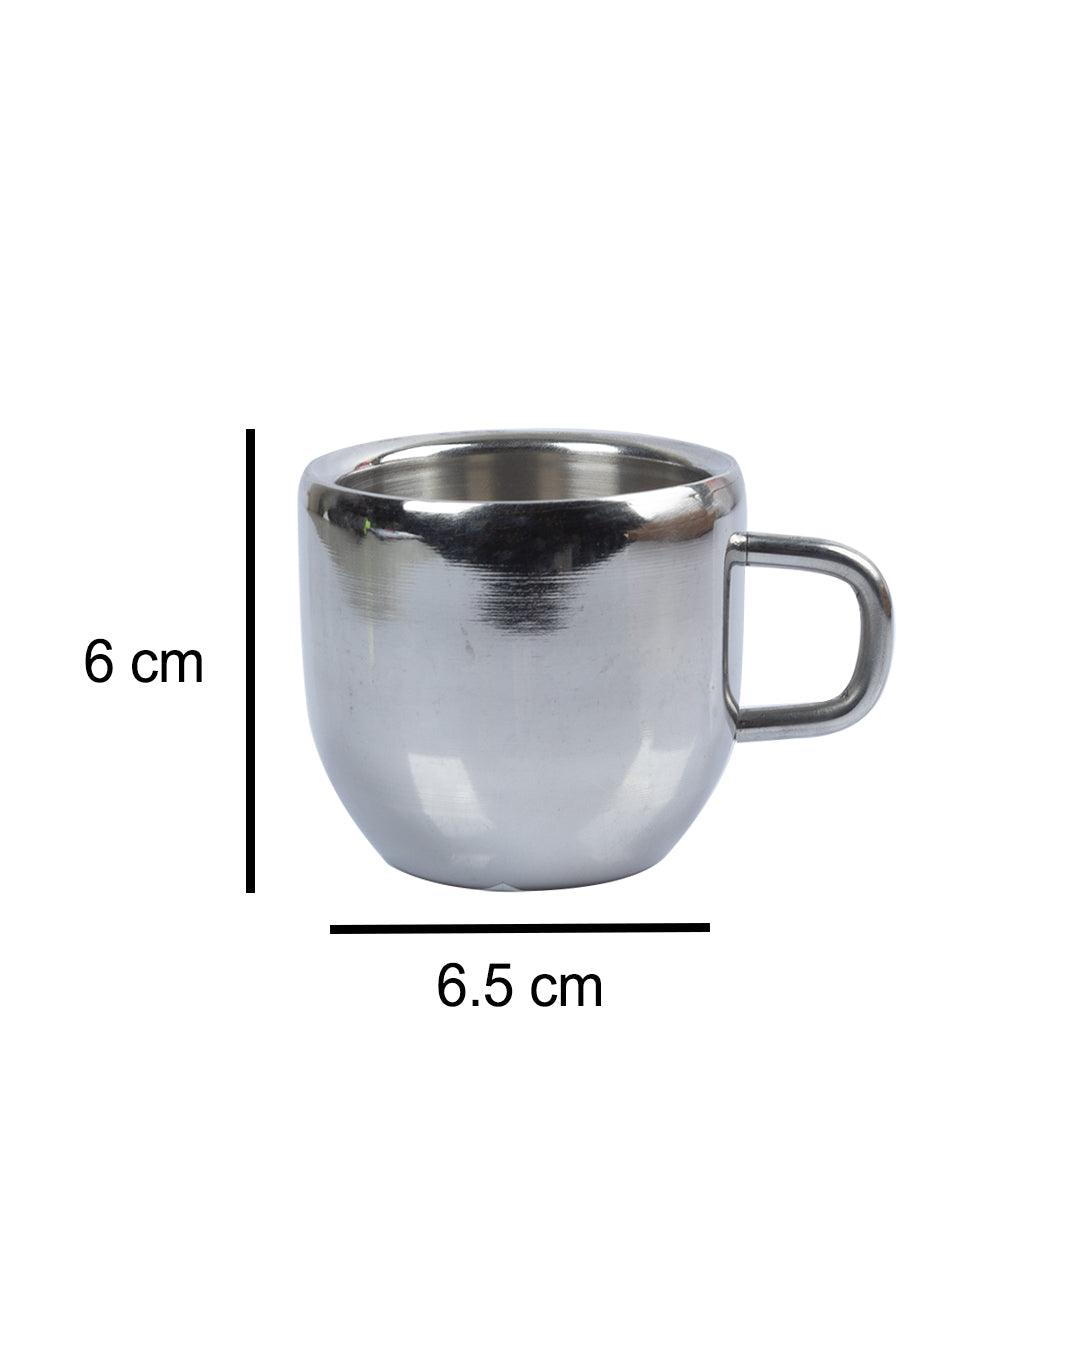 Stainless Steel Solid Tea & Coffee Mugs ( Set Of 6, 100 mL, Silver Colour) - MARKET 99